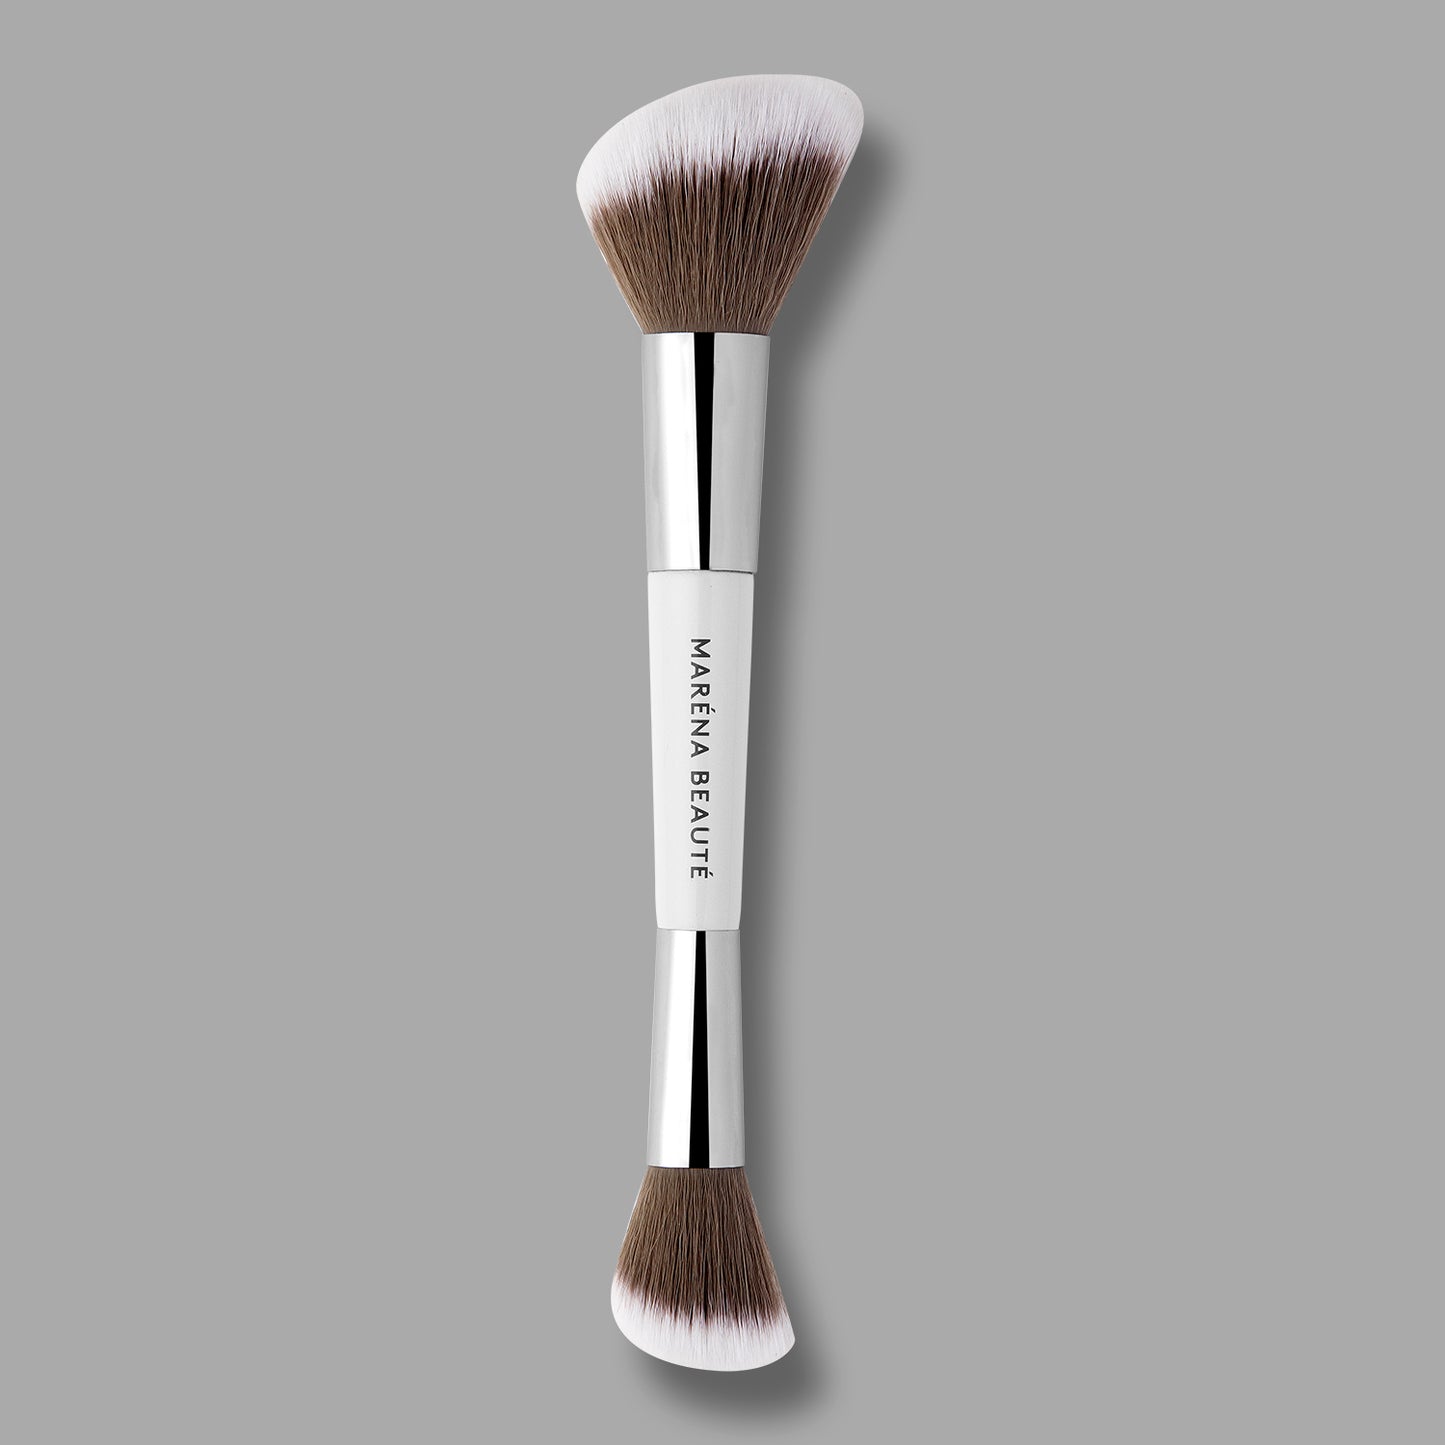 N° 3 DUAL-ENDED BLUSH AND PRECISION BRUSH